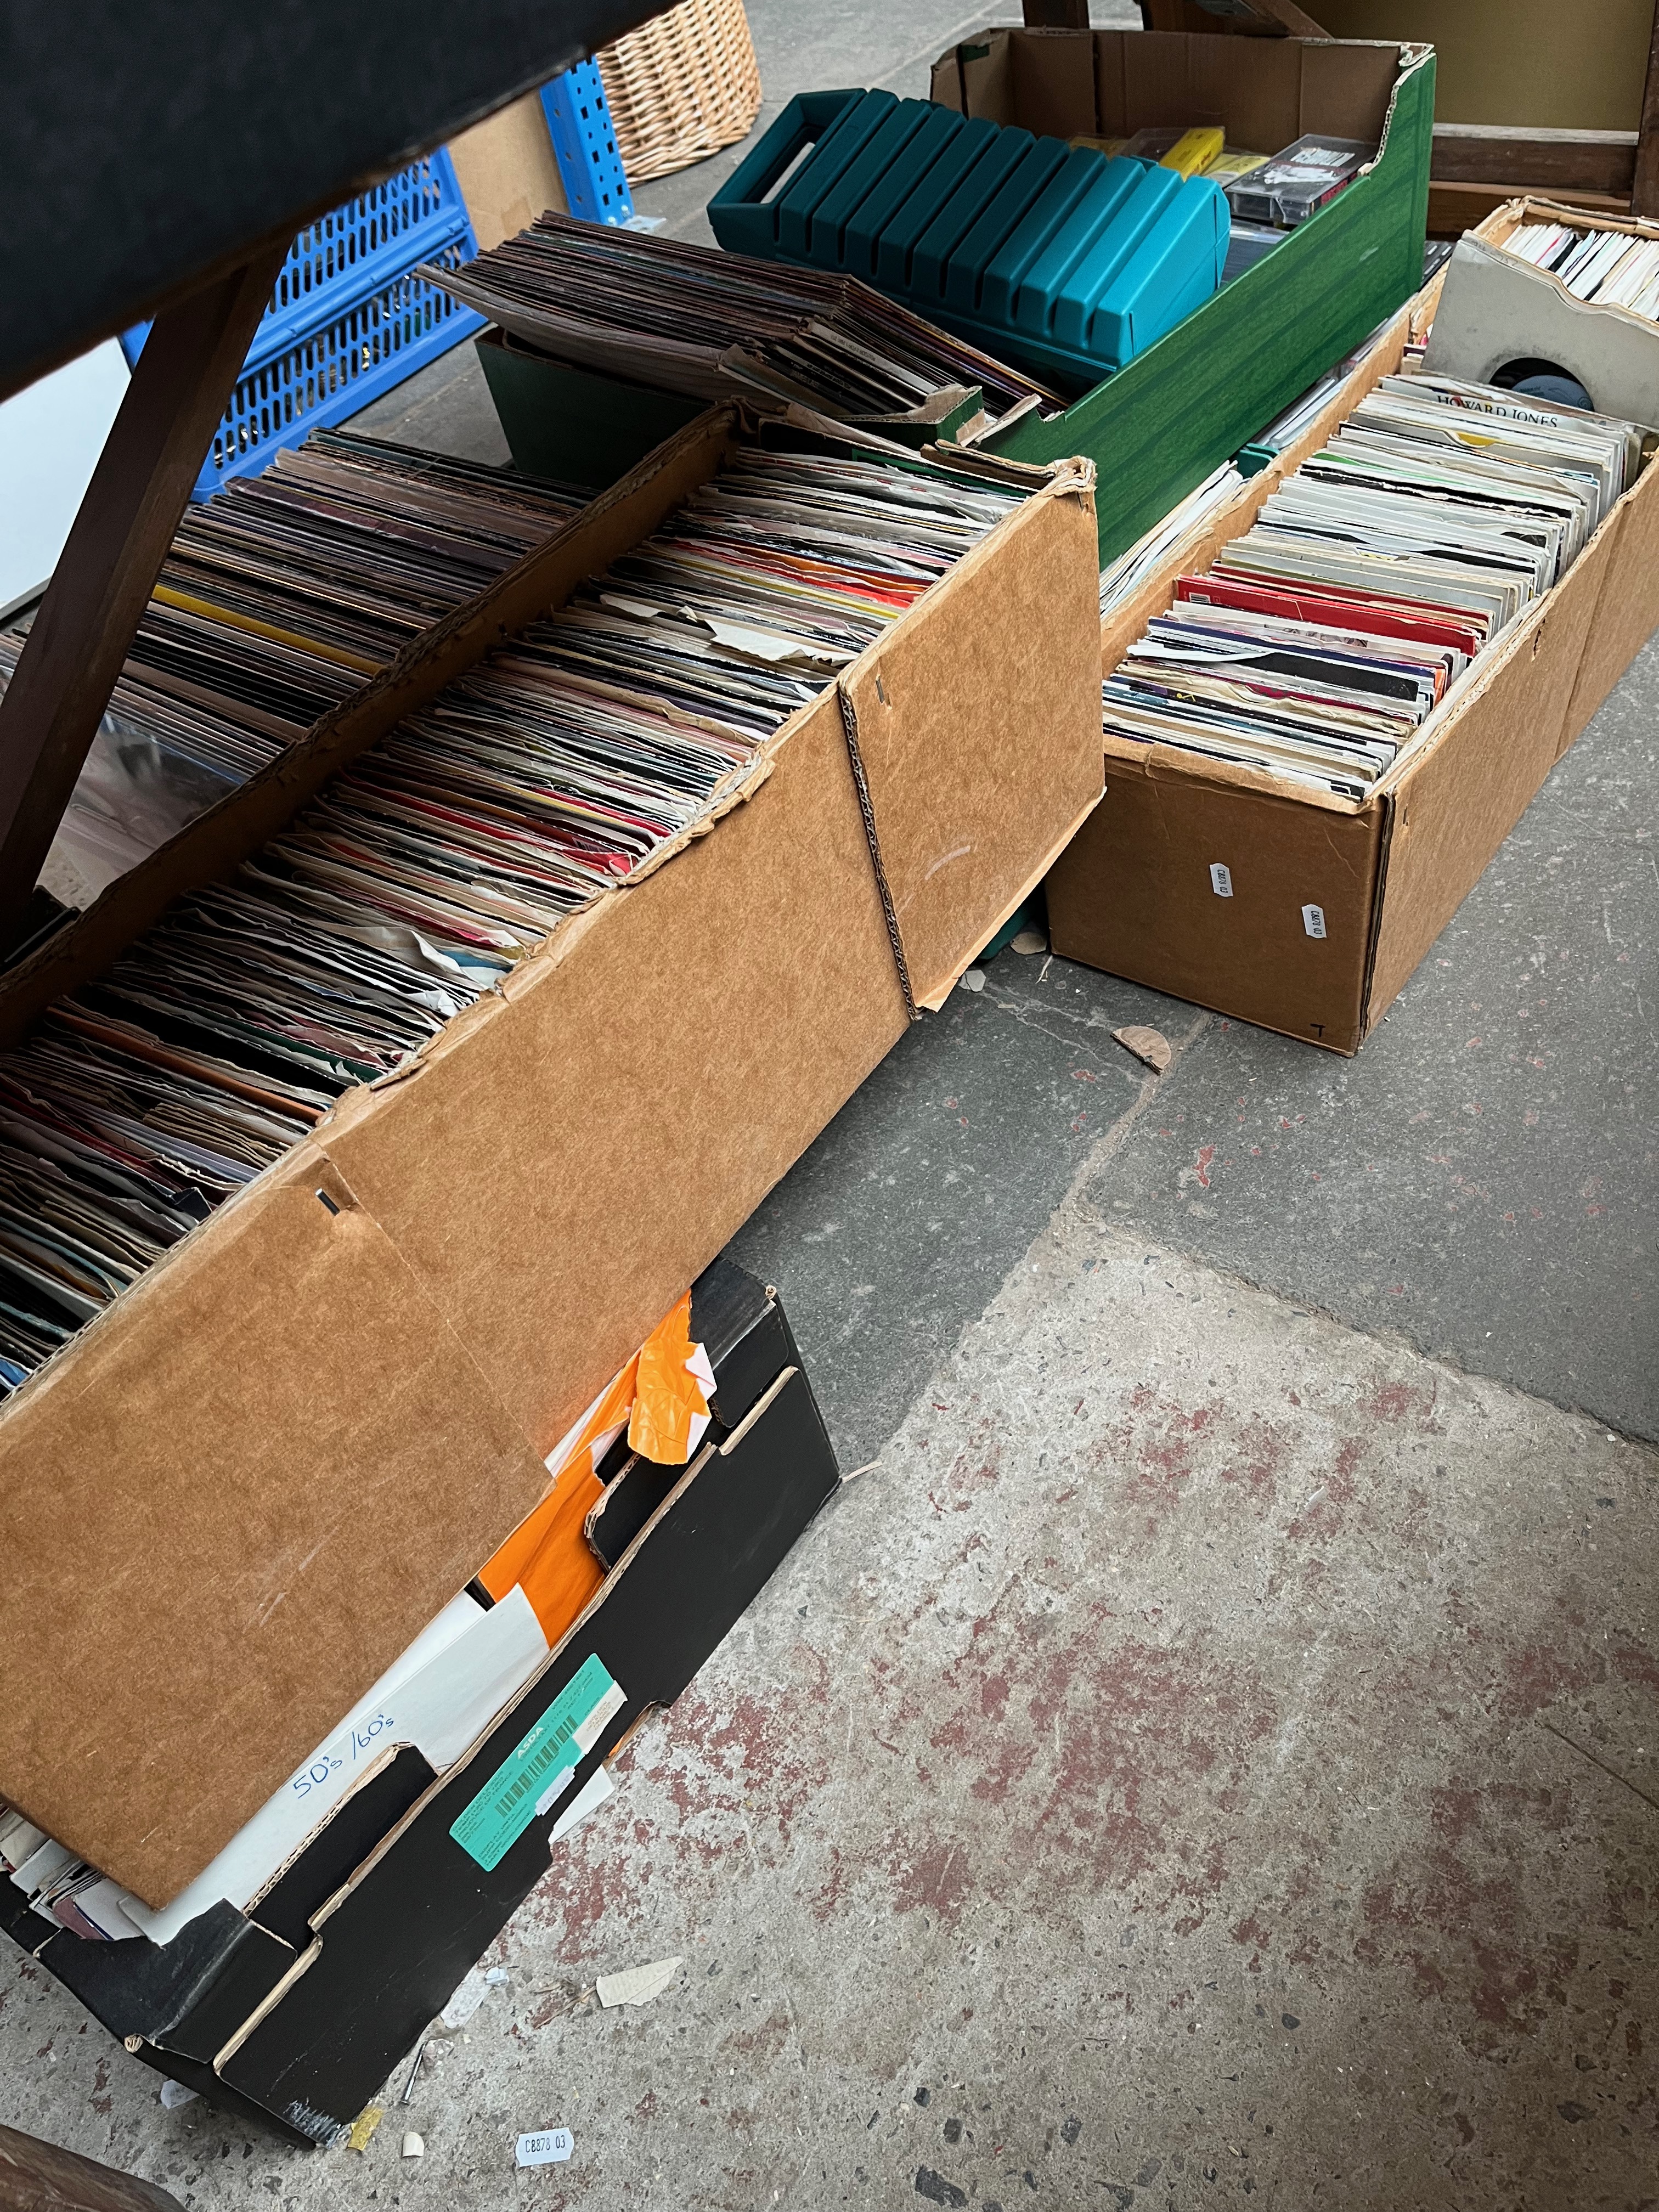 7 boxes of 45s, LPs, music cassettes and CDs.